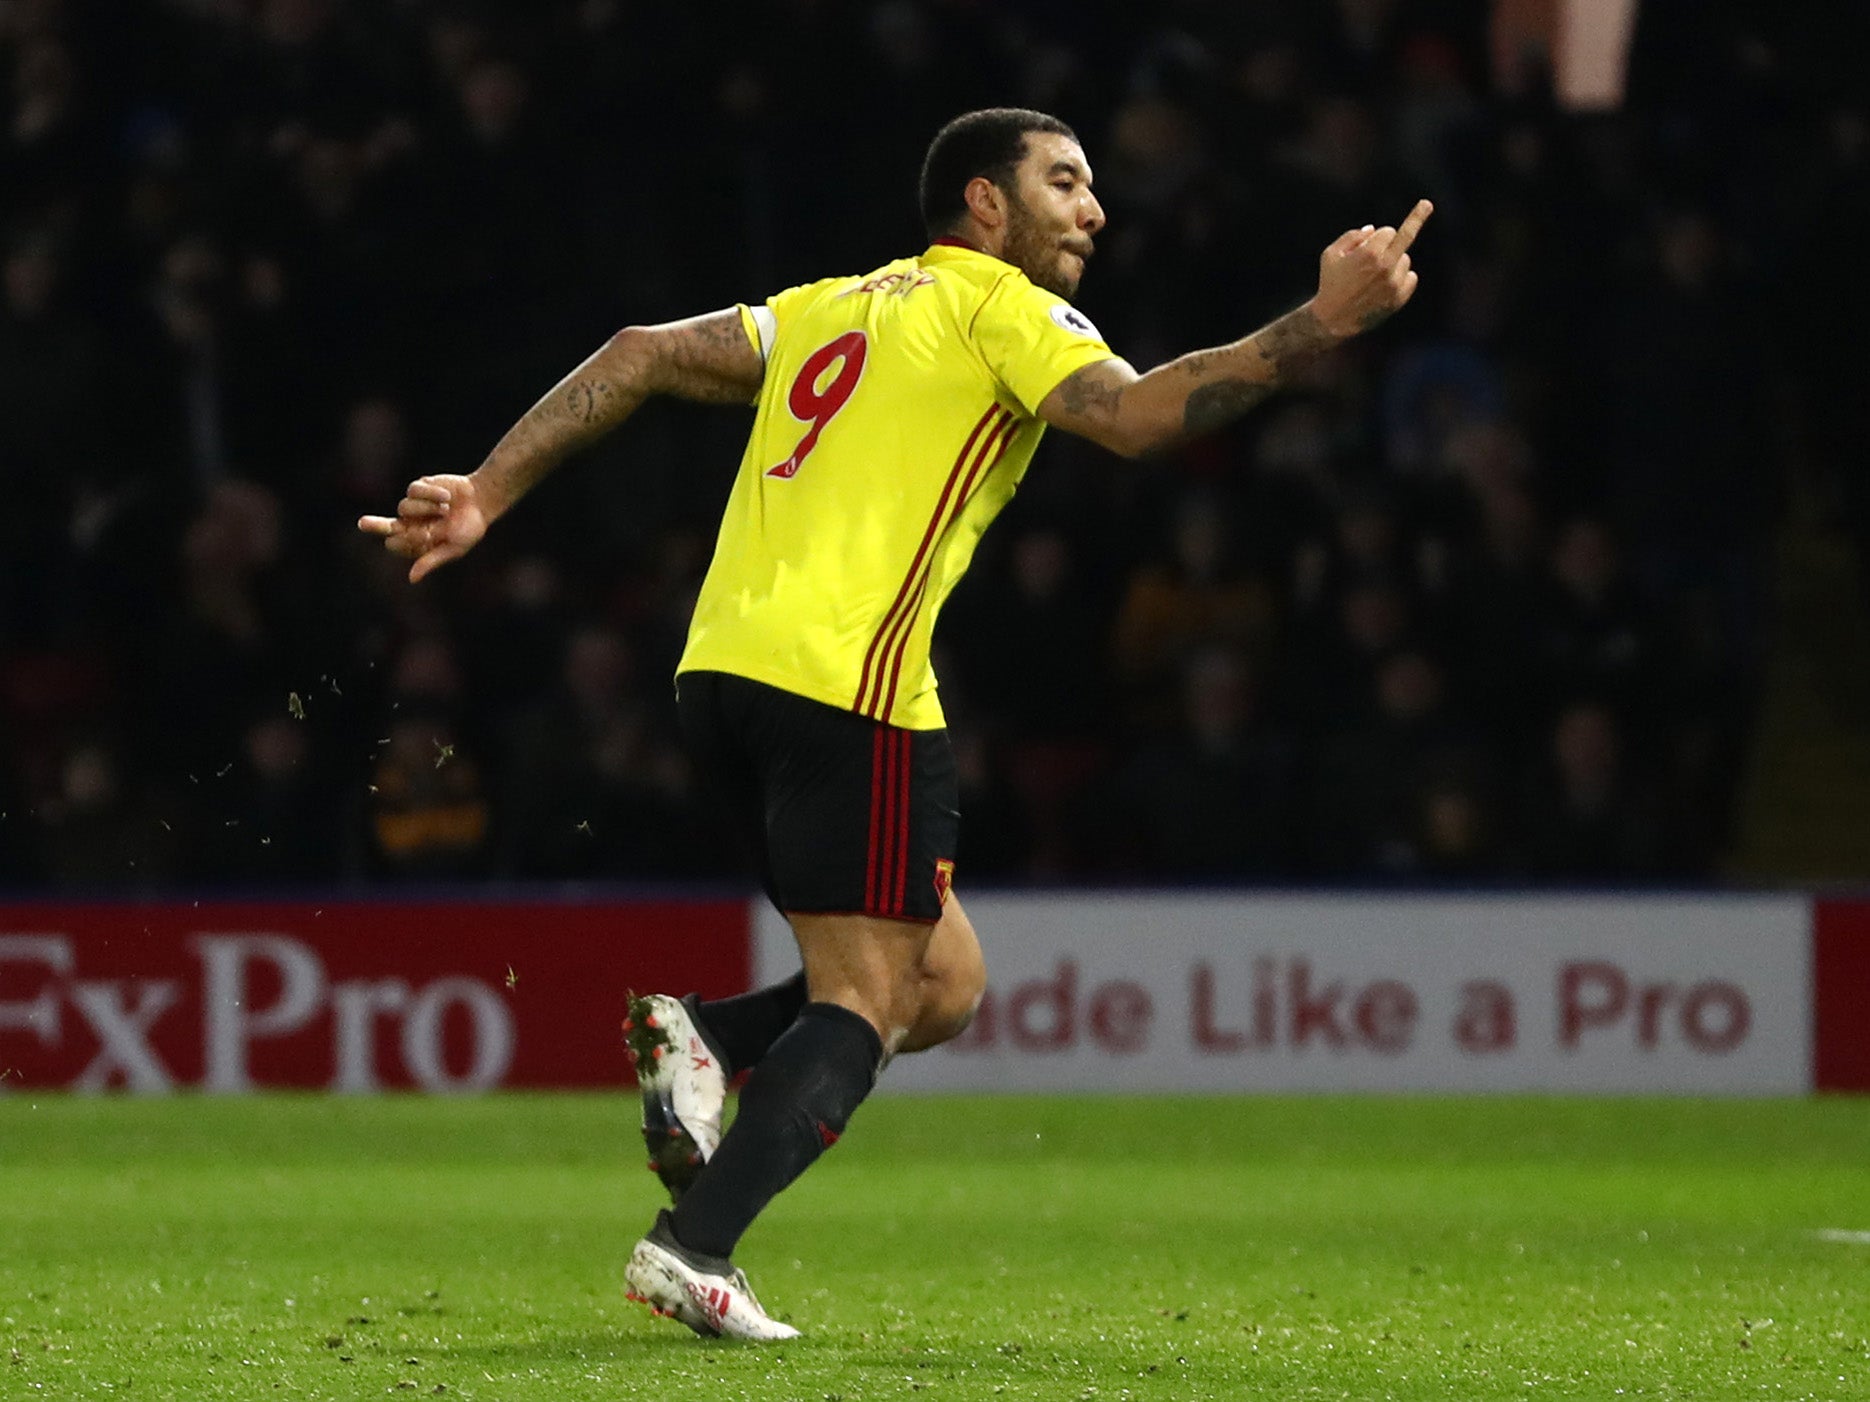 Troy Deeney could take his suspension total to 11 games this season